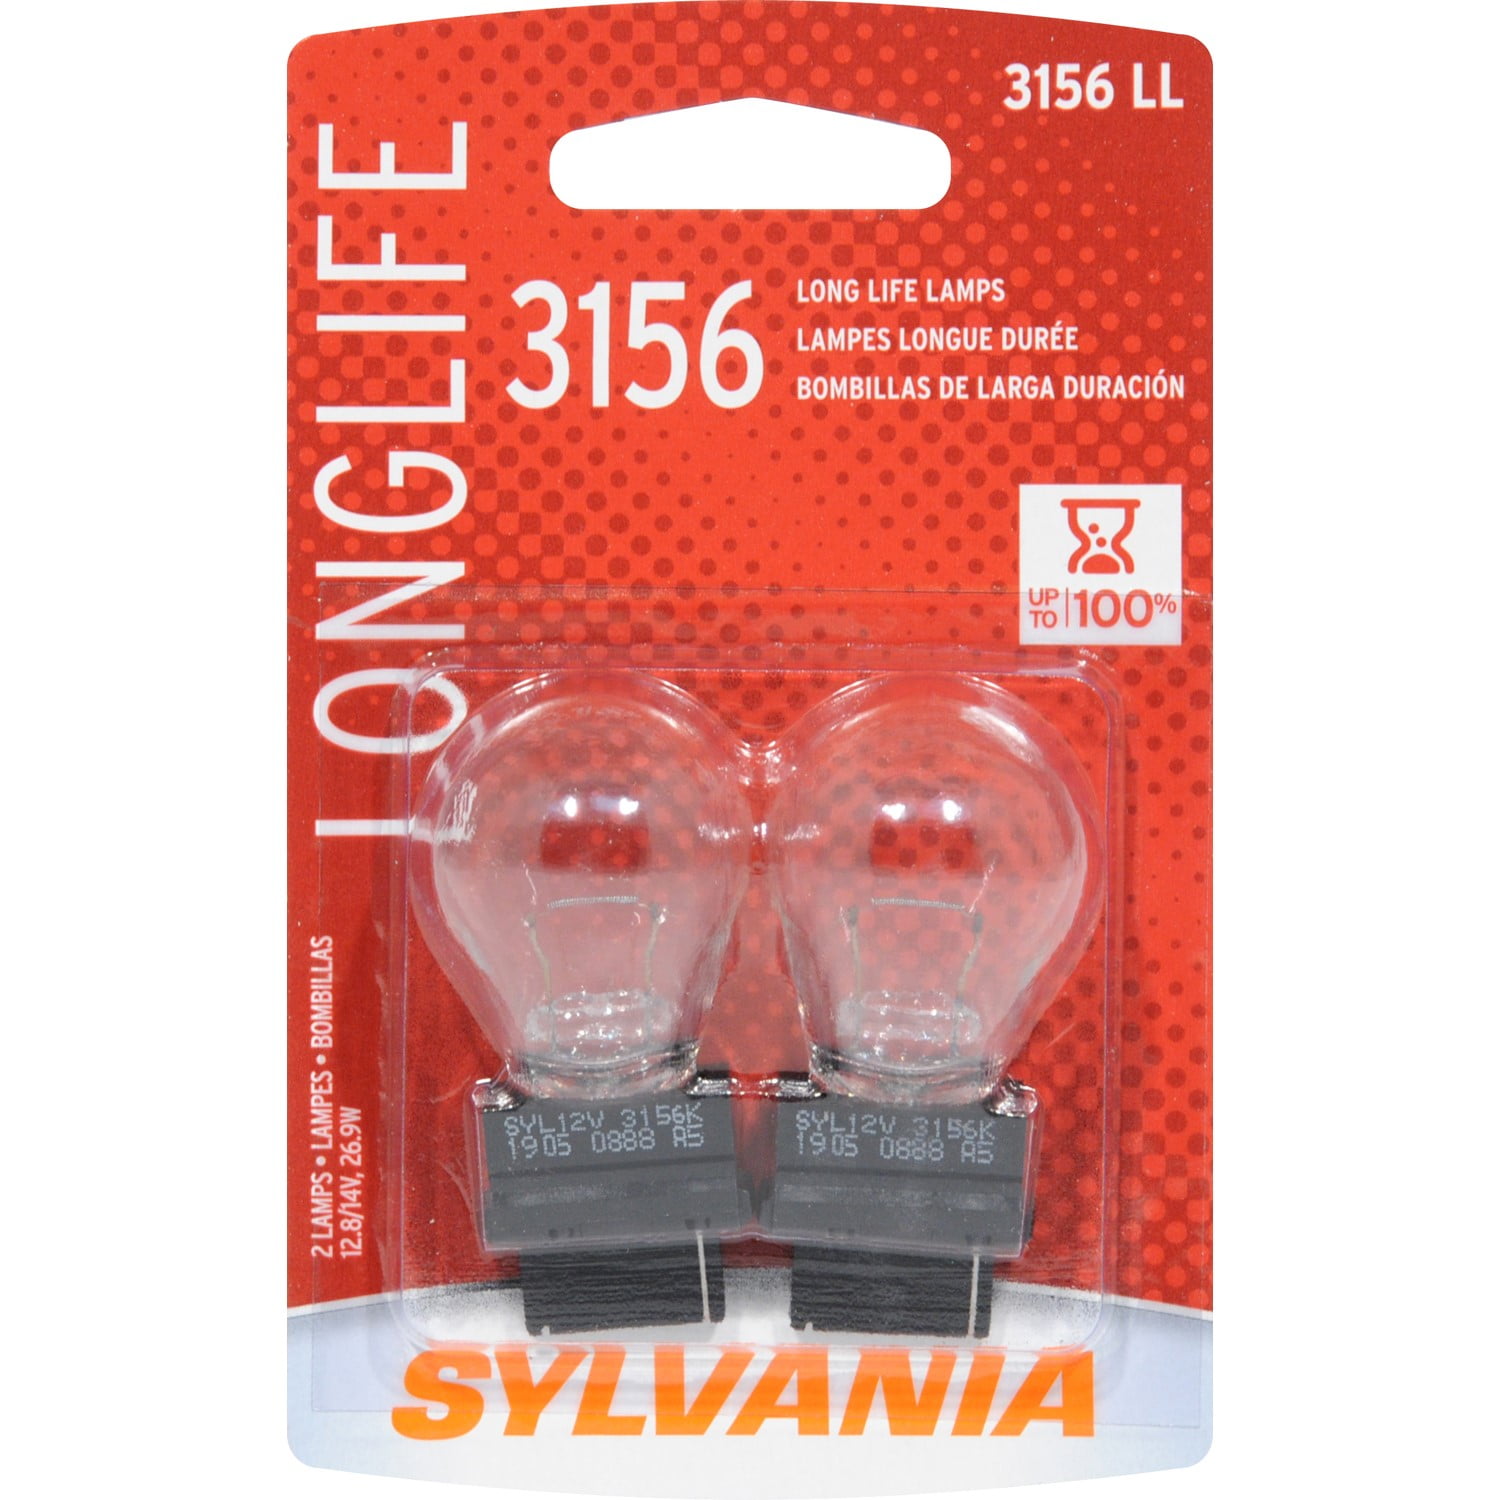 Ideal for Daytime Running Lights DRL 3156 Long Life Miniature and Back-Up/Reverse Lights SYLVANIA Contains 2 Bulbs Bulb 